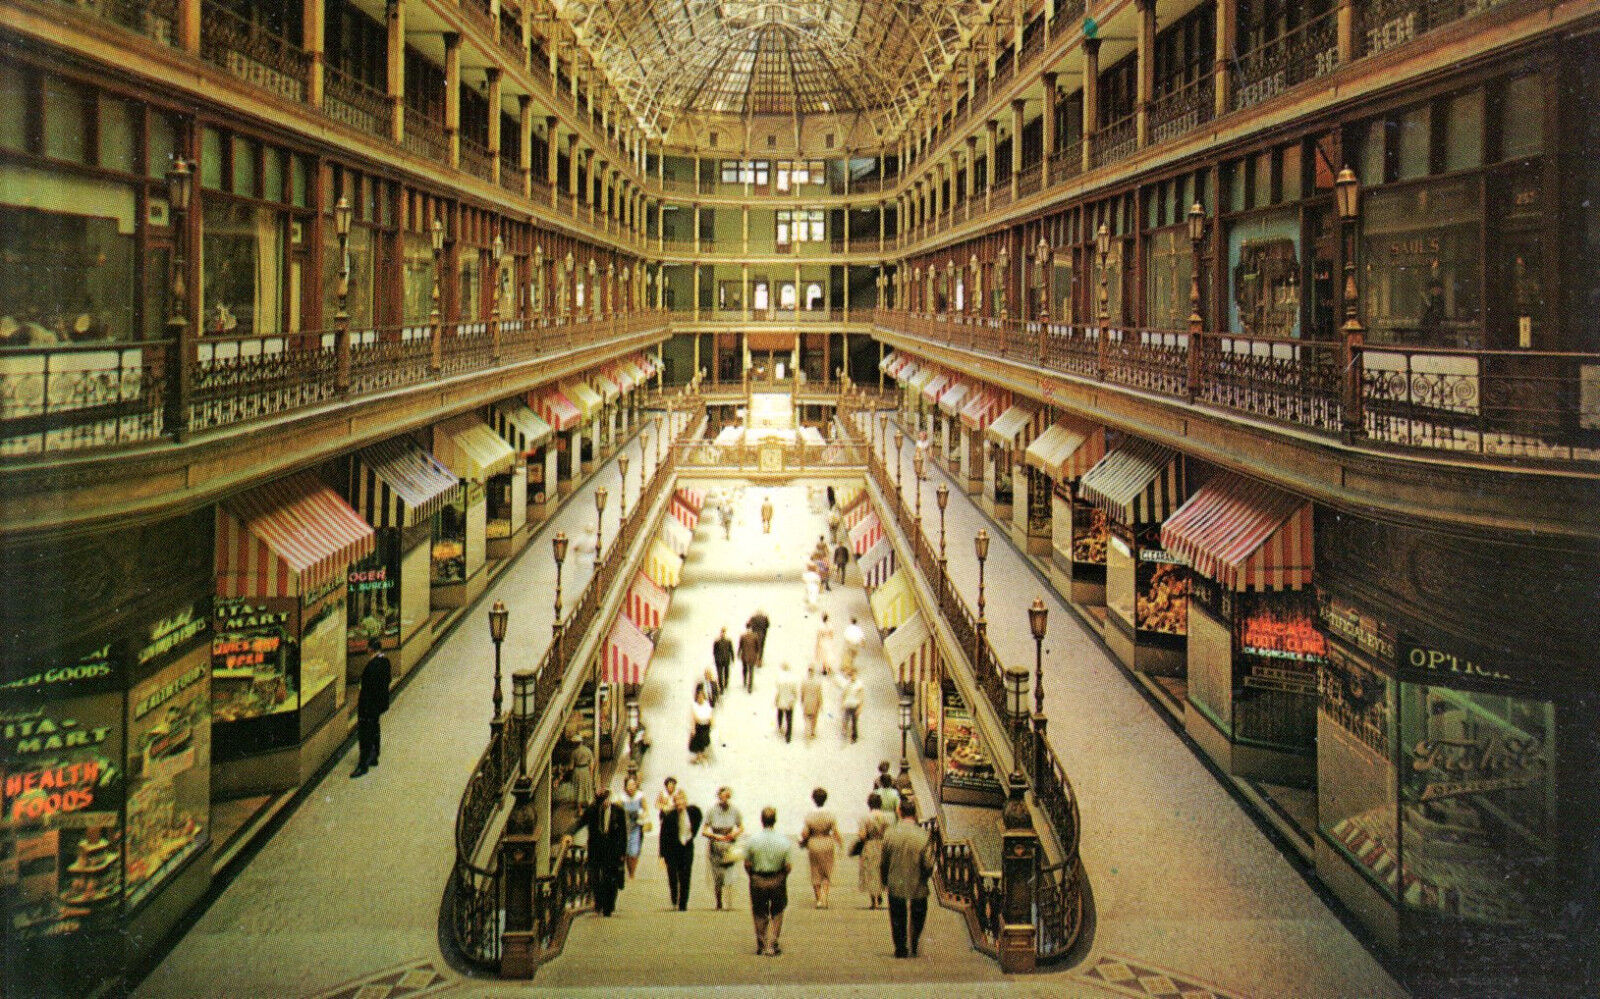 House Clearance - USA-Ohio-Cleveland-Shopping mall "The Arcade" in the heart of downtown